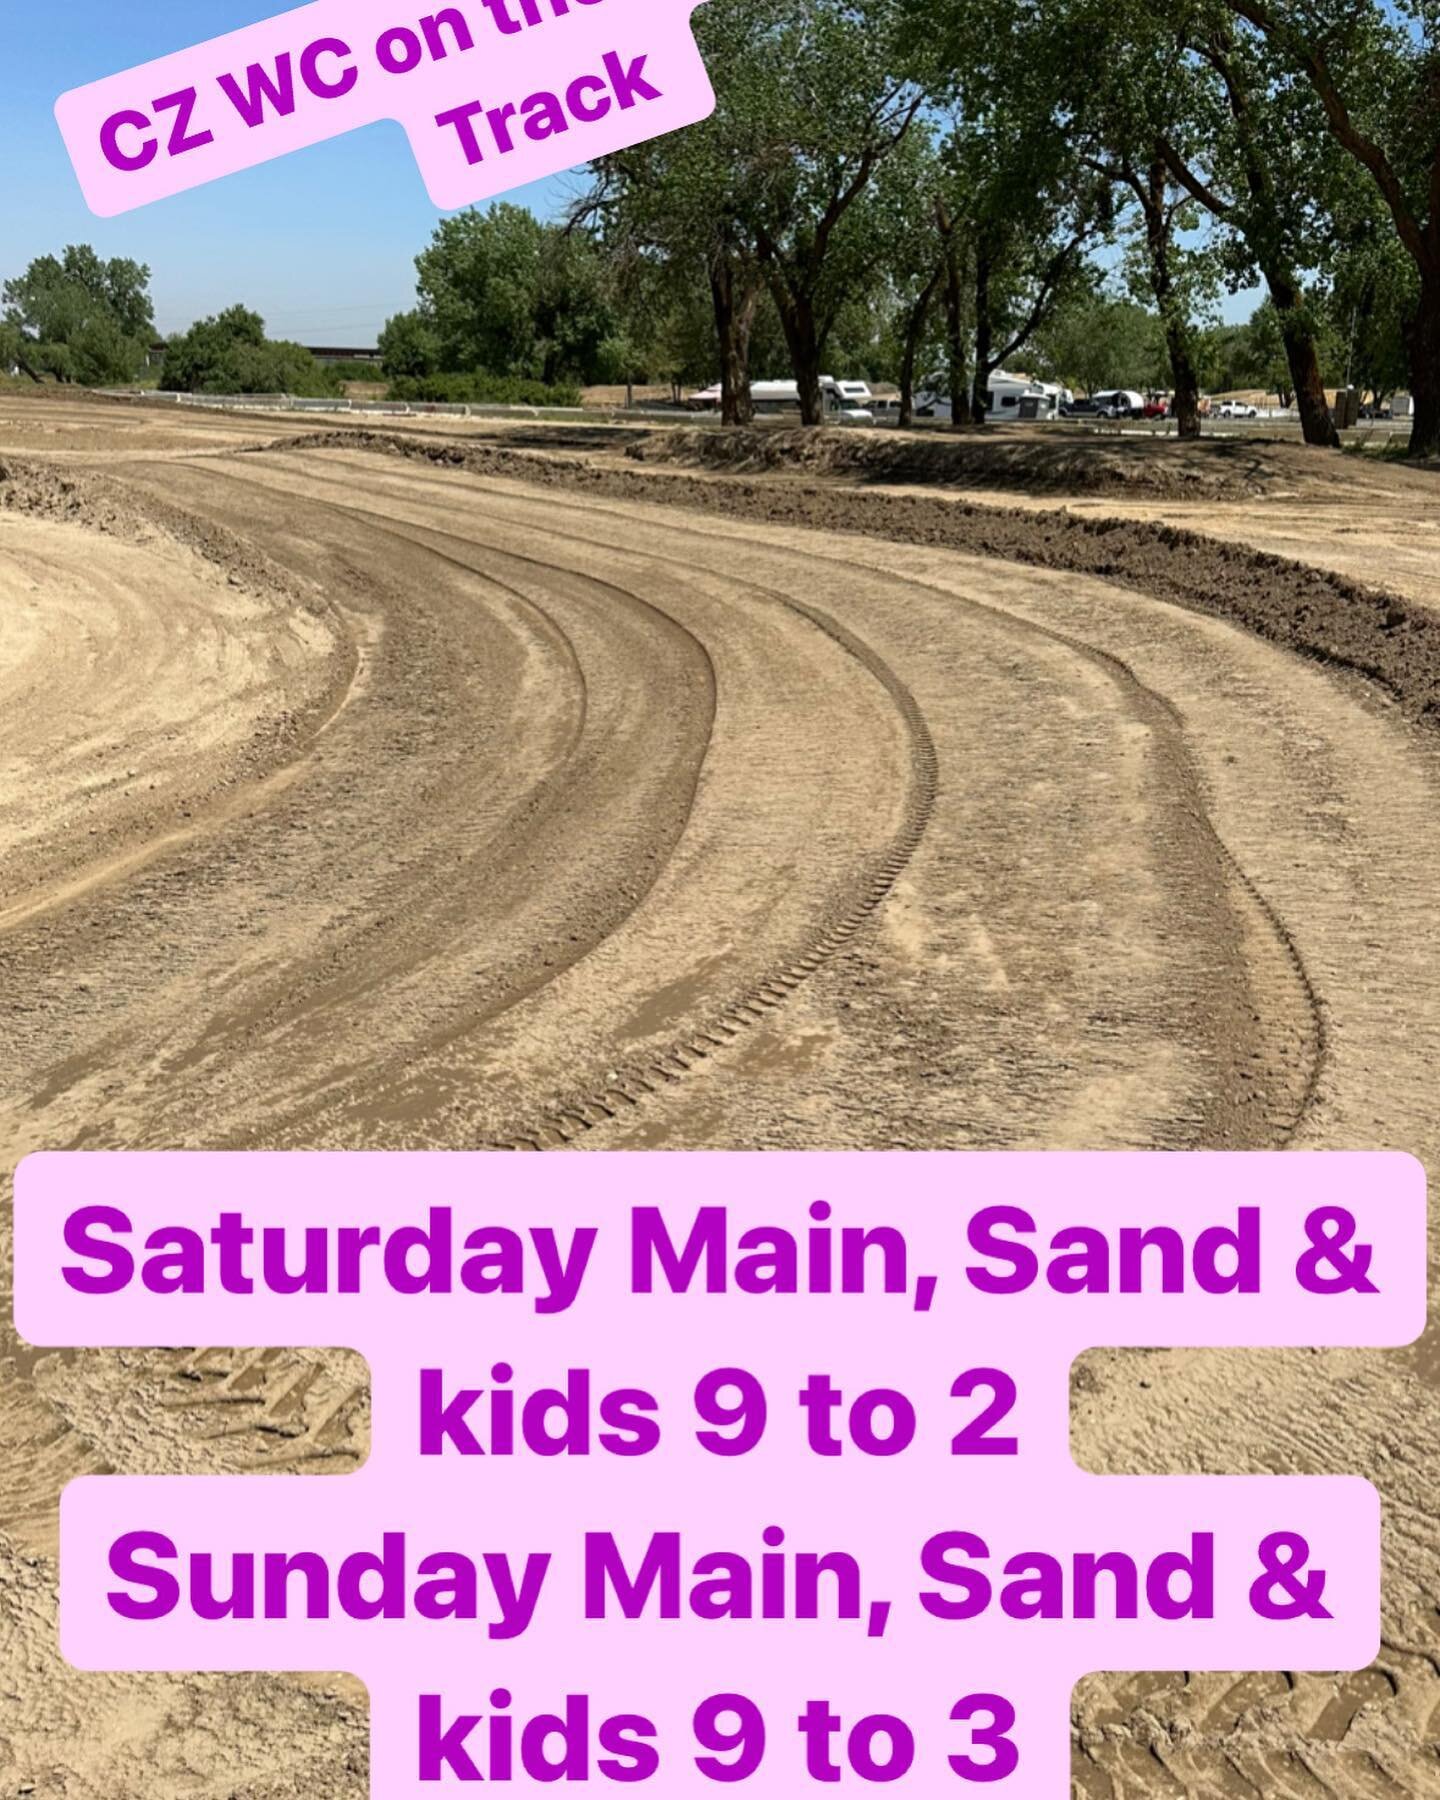 Regular practice Saturday 9 to 2  and Sunday 9 to 3 on Main, Sand &amp; kids track. CZ World Championships Race on the Vintage track.